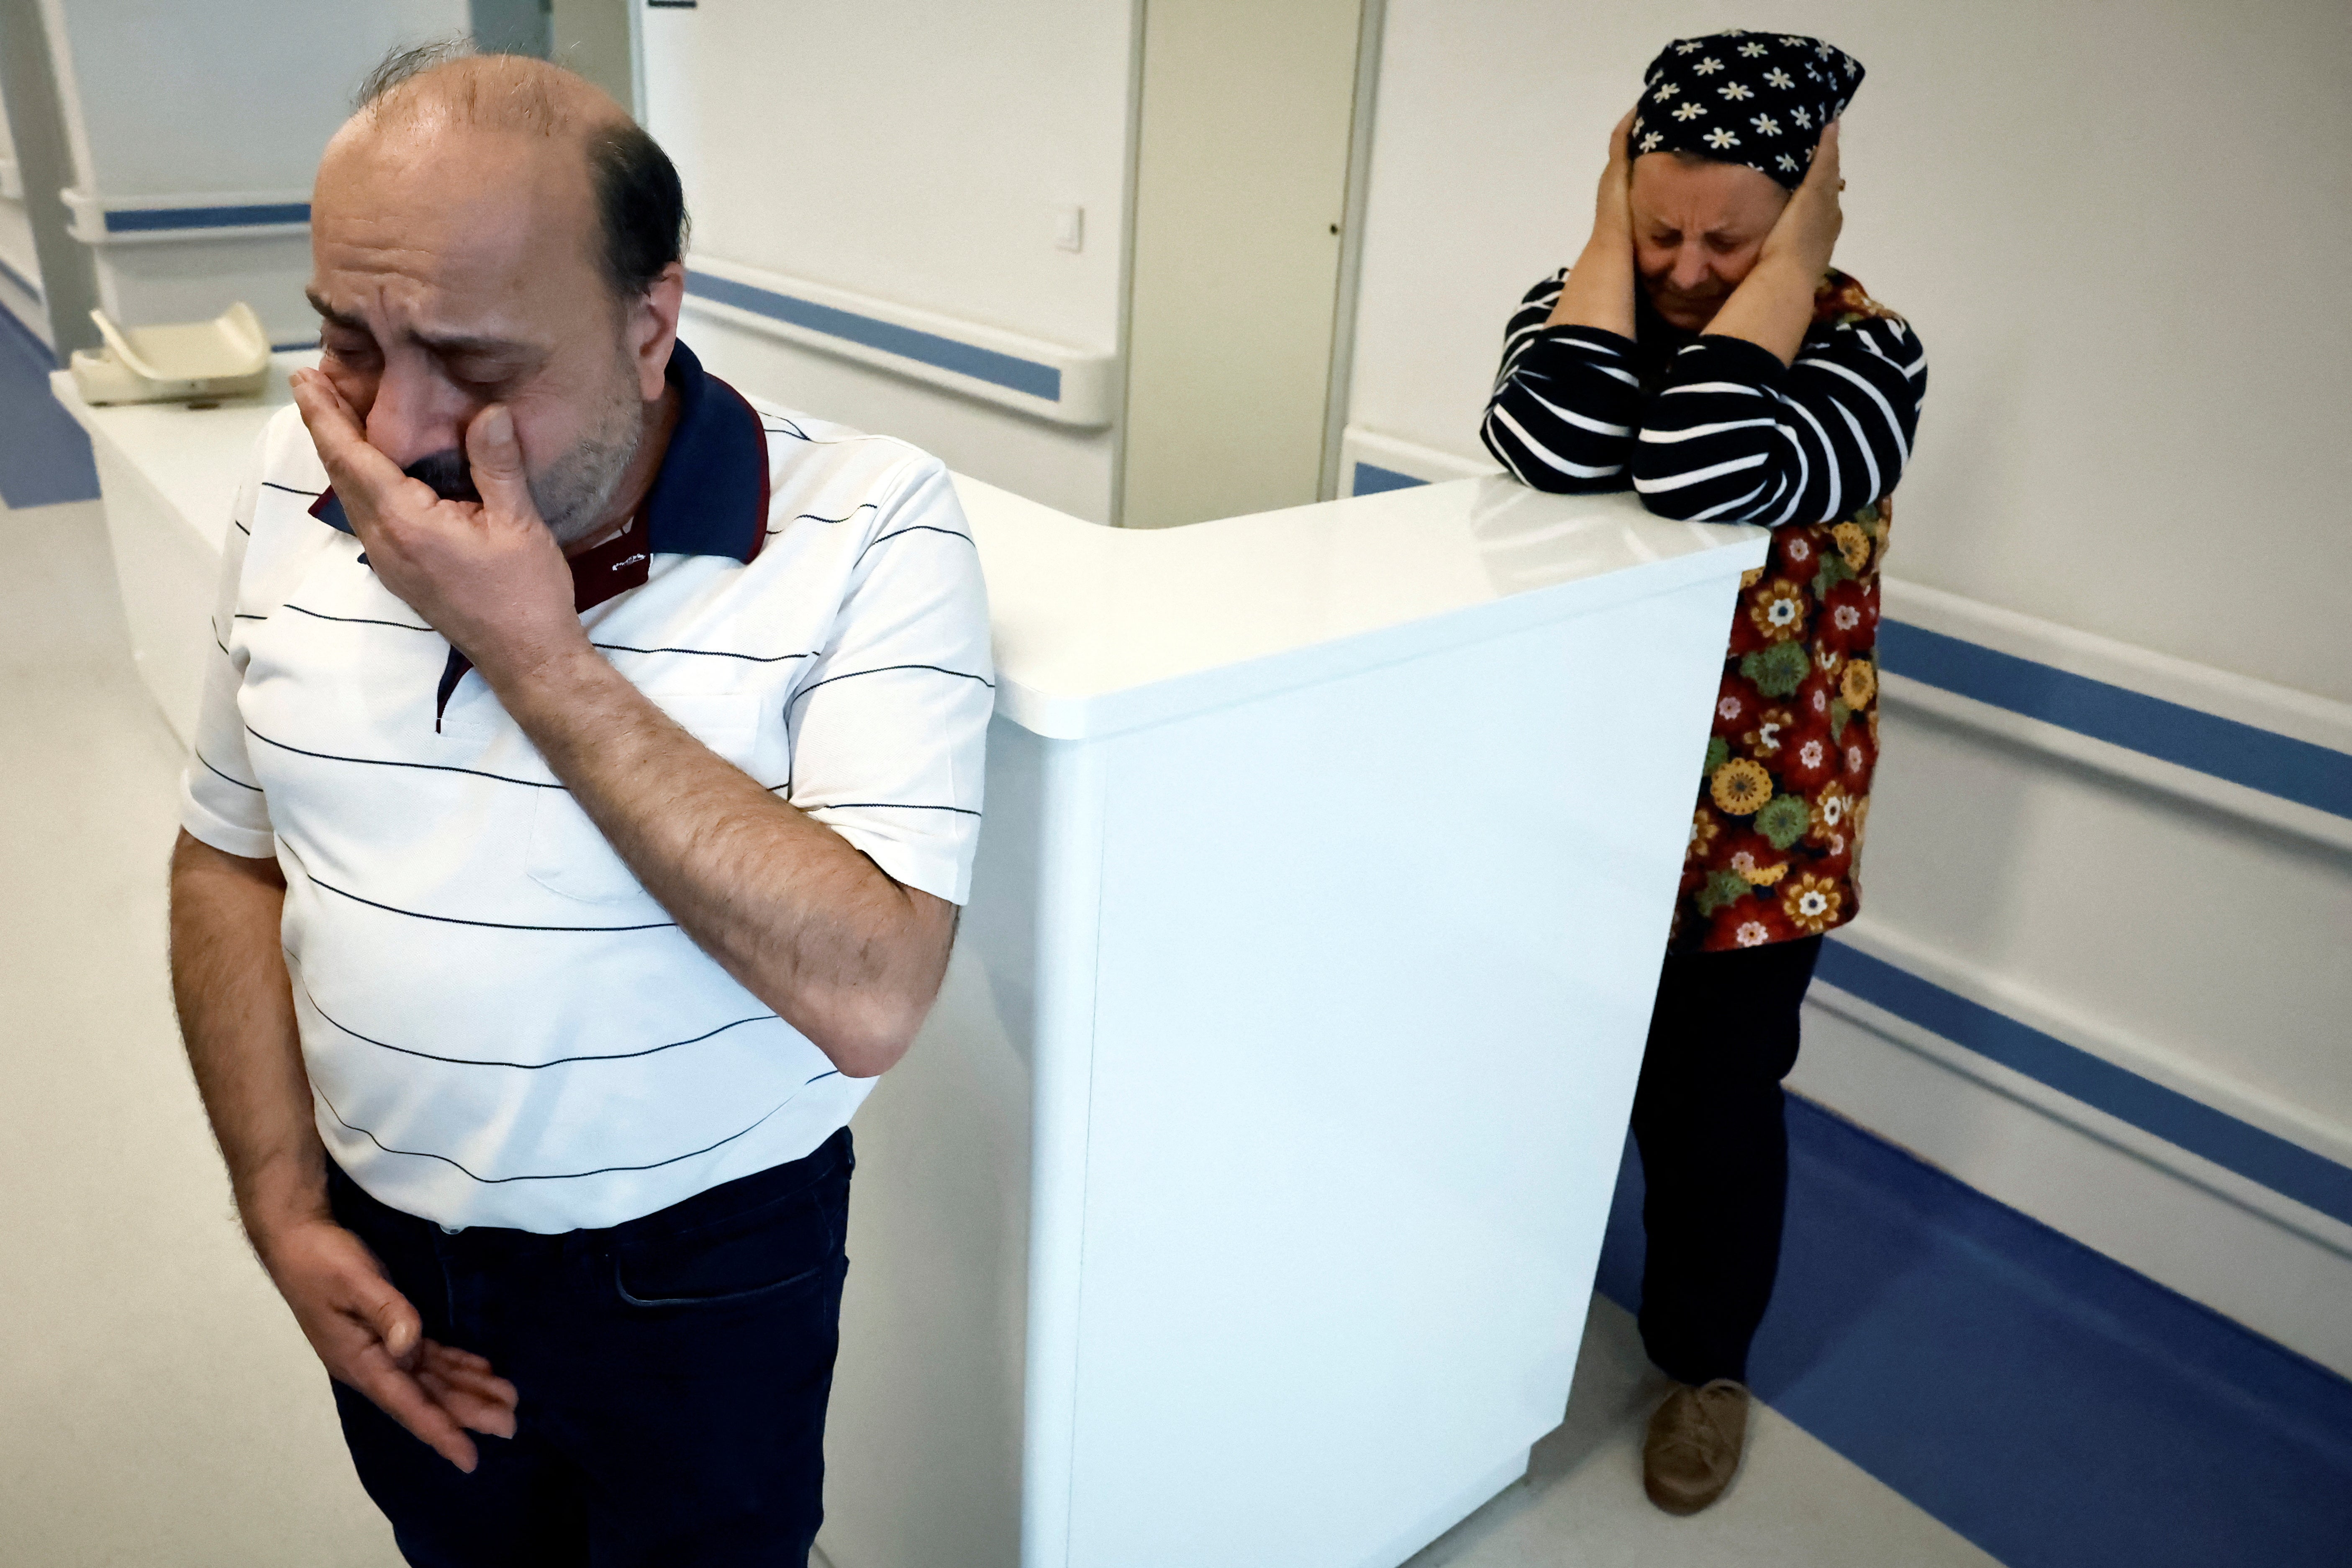 Hasan Koc and his late wife's mother Emine Karalioglu, 63, react in the hallway of Mersin hospital while his son Mehmet, screams as nurses change the bandages on his amputated legs in Turkey